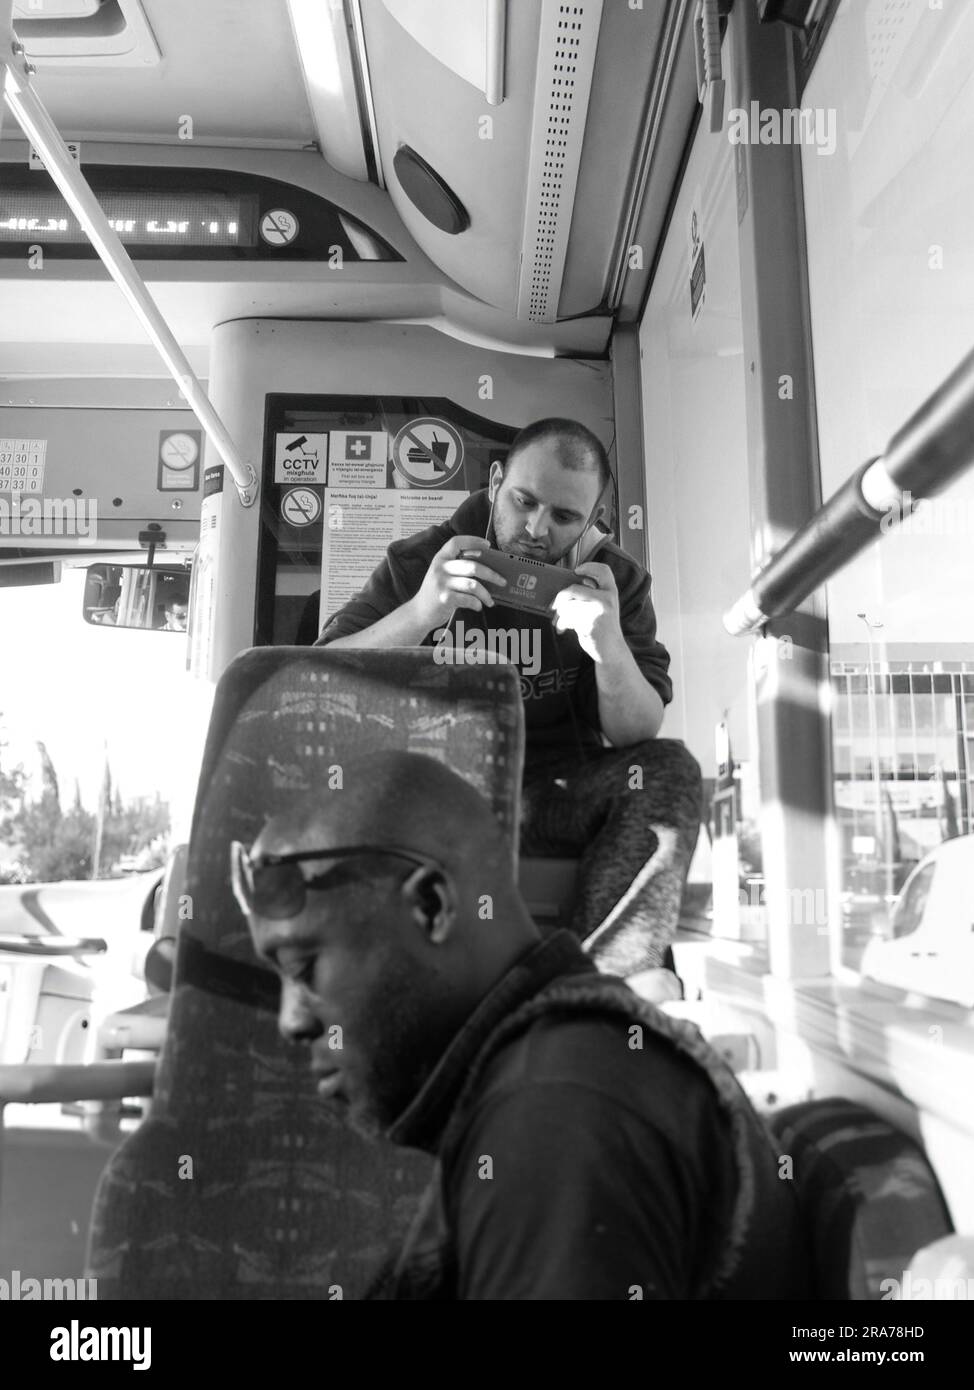 black and white young man sitting on public bus and playing with video games, Valletta, Malta Stock Photo